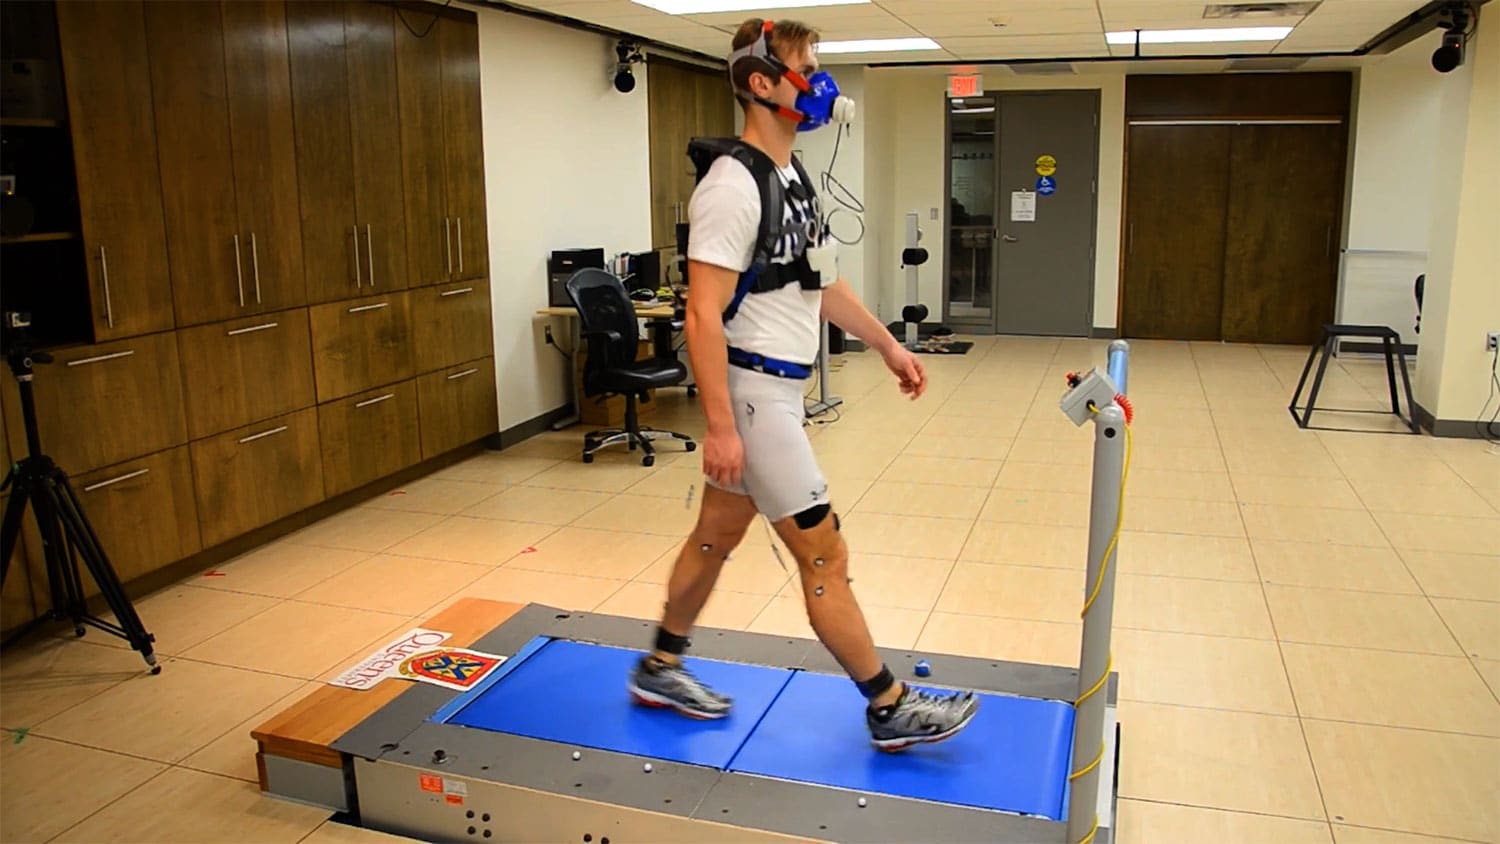 Lightweight exoskeleton allows users to walk further while using less energy.